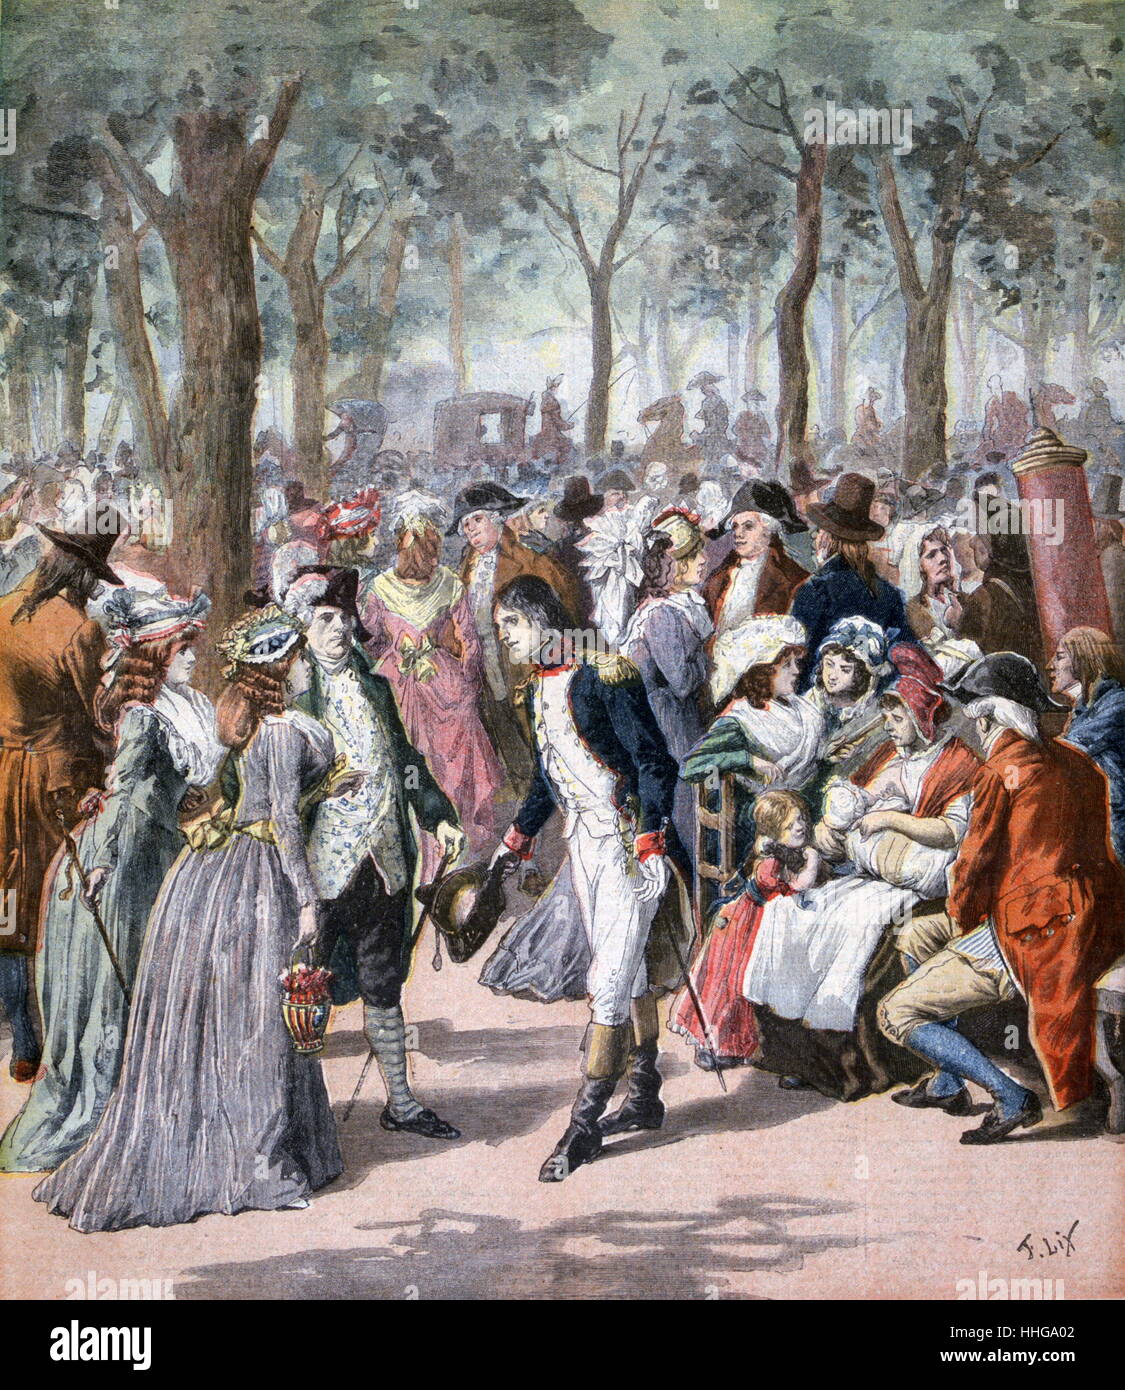 18th century French fashions remembered. A fashionable scene in the park with men and women greeting each other. 1894 illustration Stock Photo